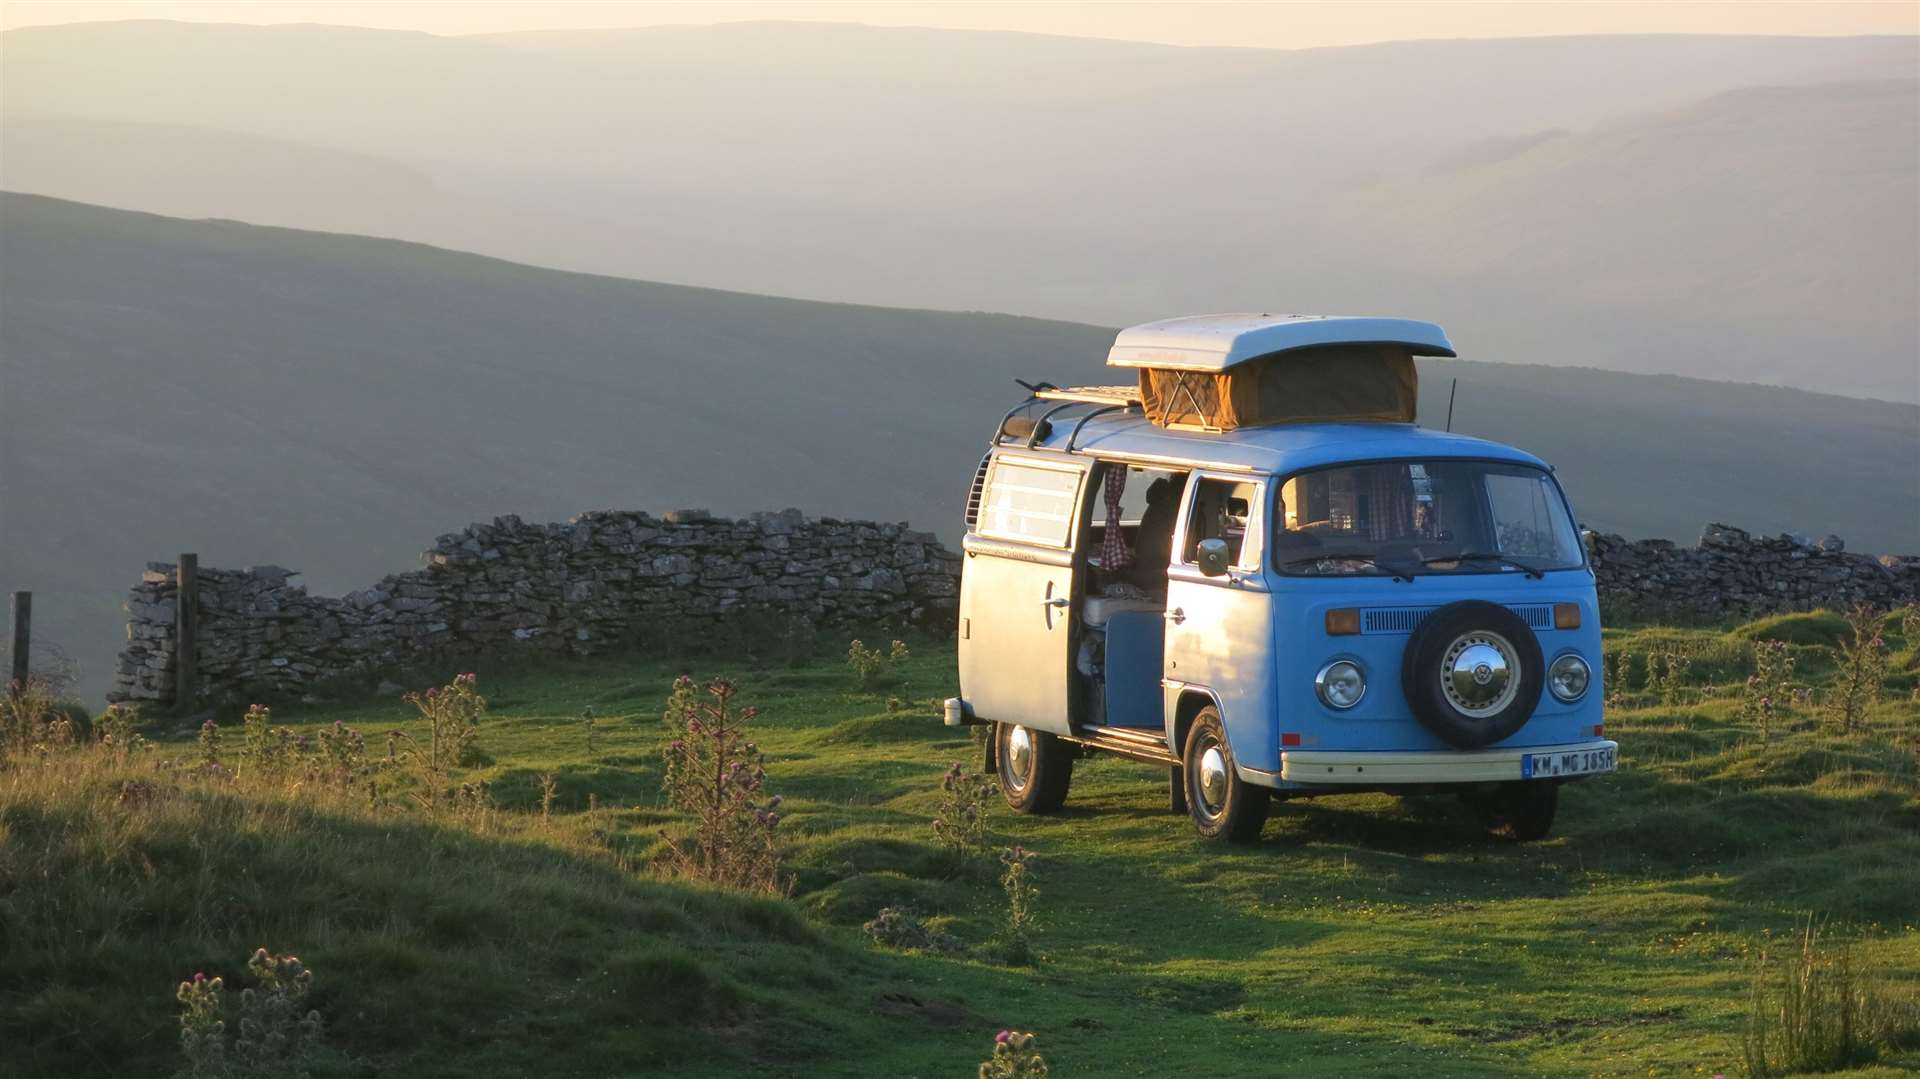 Campervan holidays are set to be popular later this summer. Picture: PA Photo/iStock